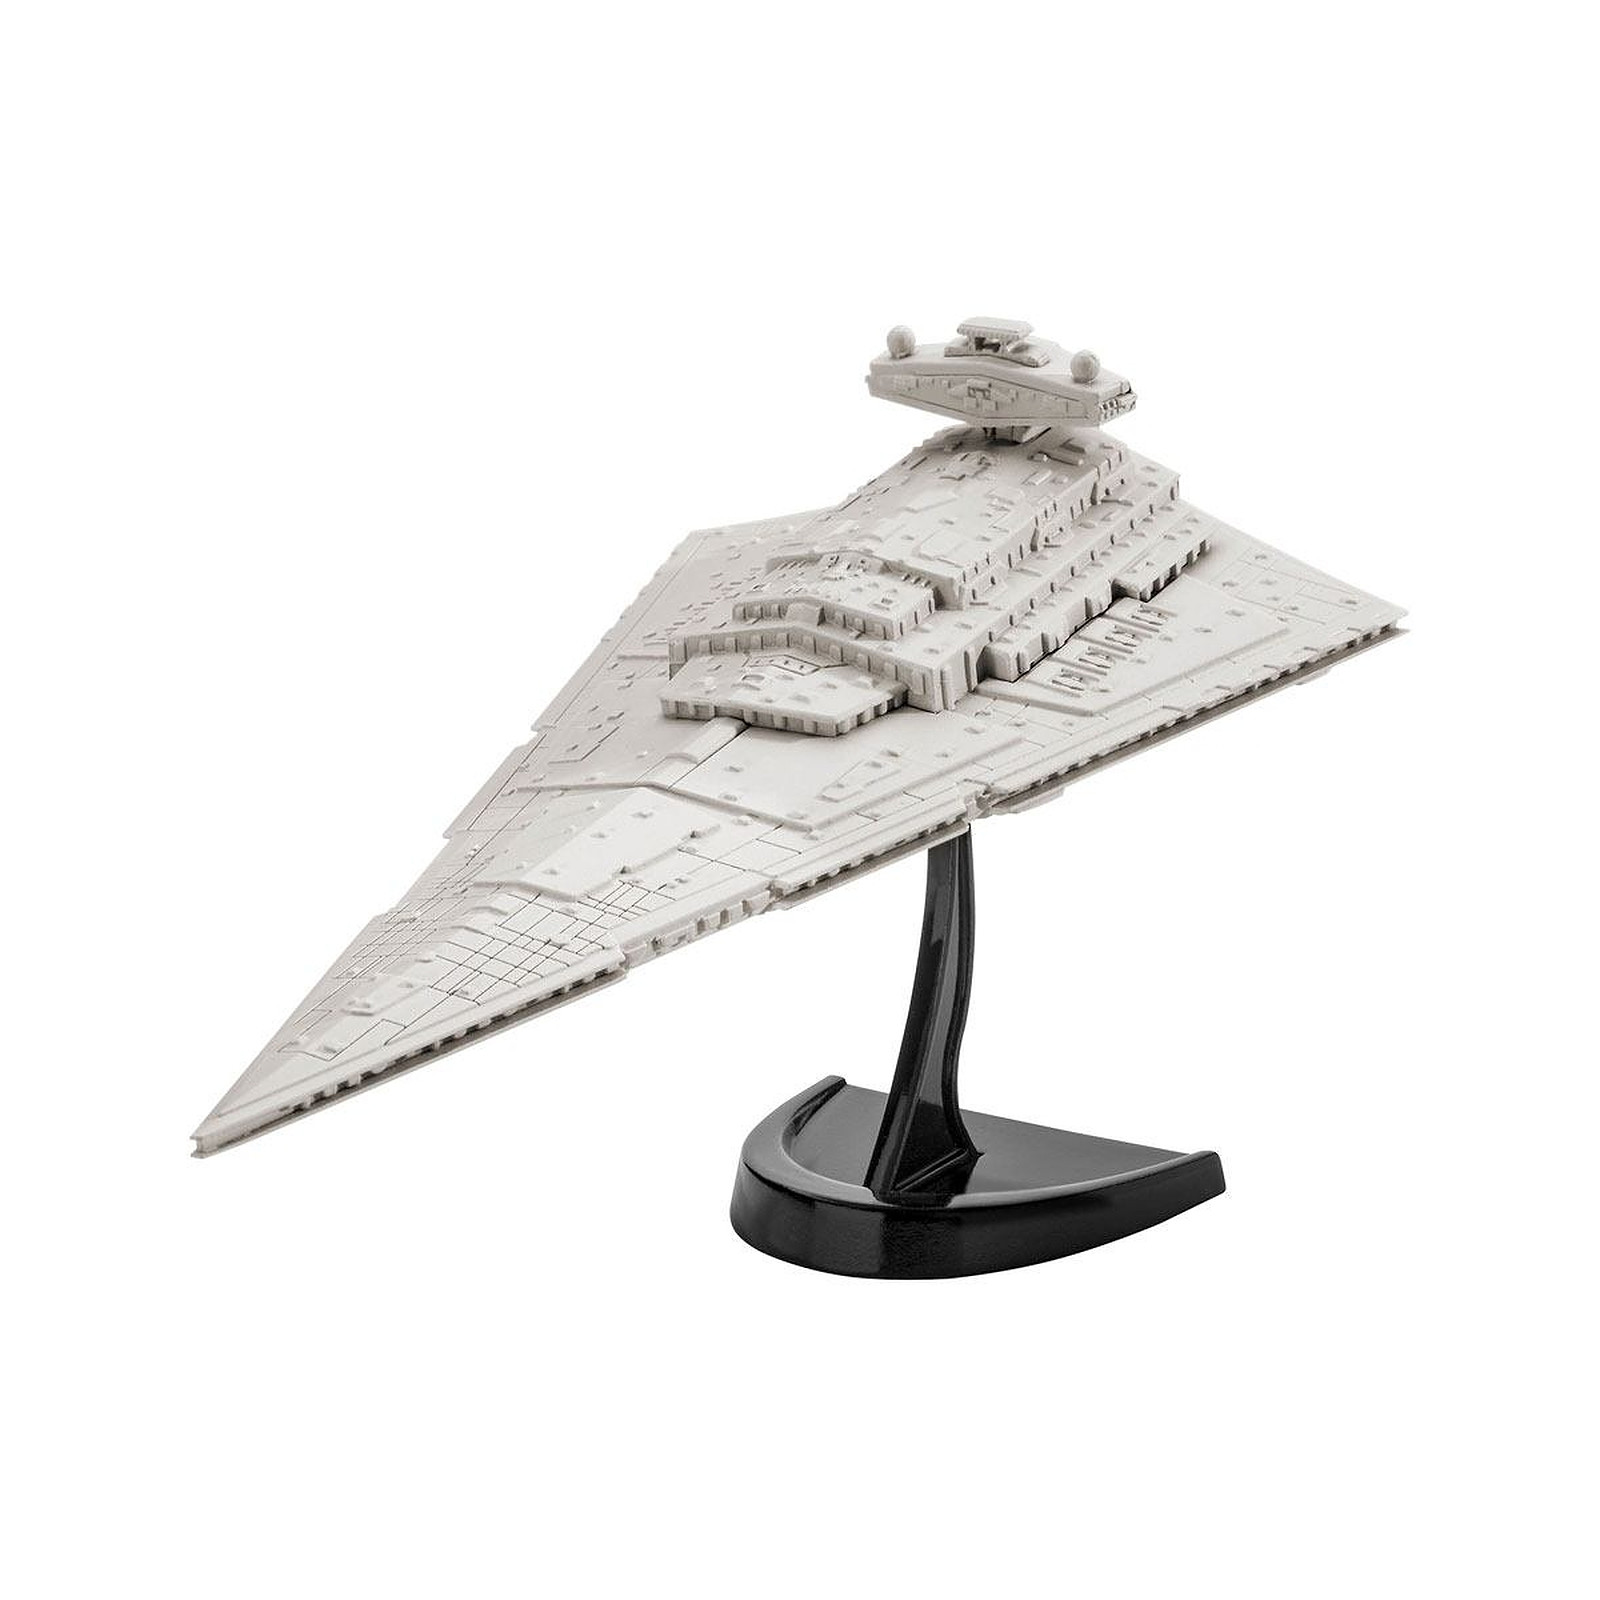 Star Wars - Maquette 1/12300 Imperial Star Destroyer 13 cm - Figurines Revell